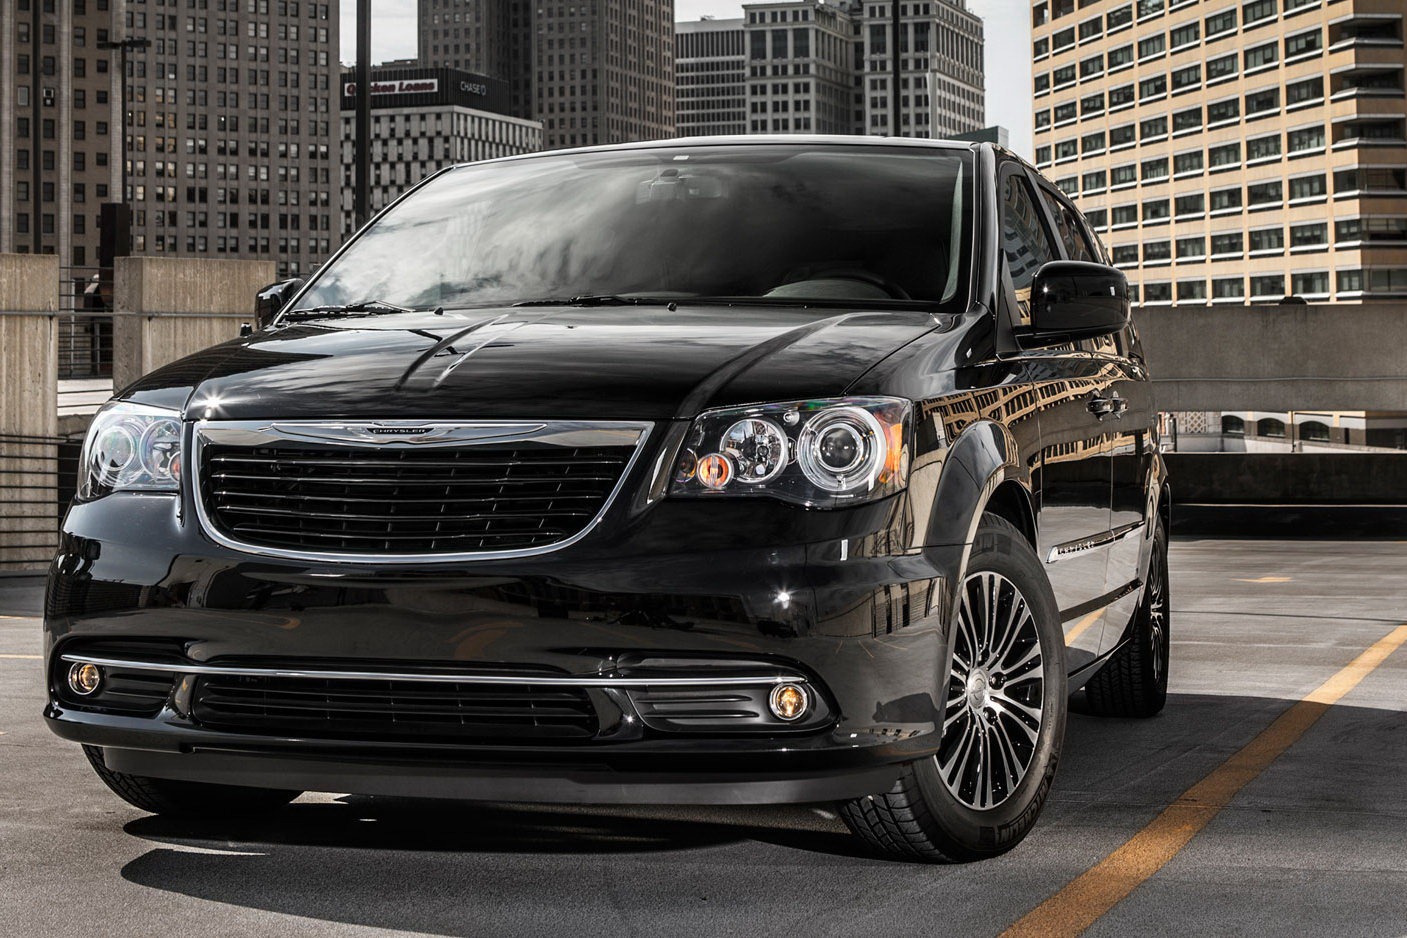 2013 Chrysler Town and Country S Edition